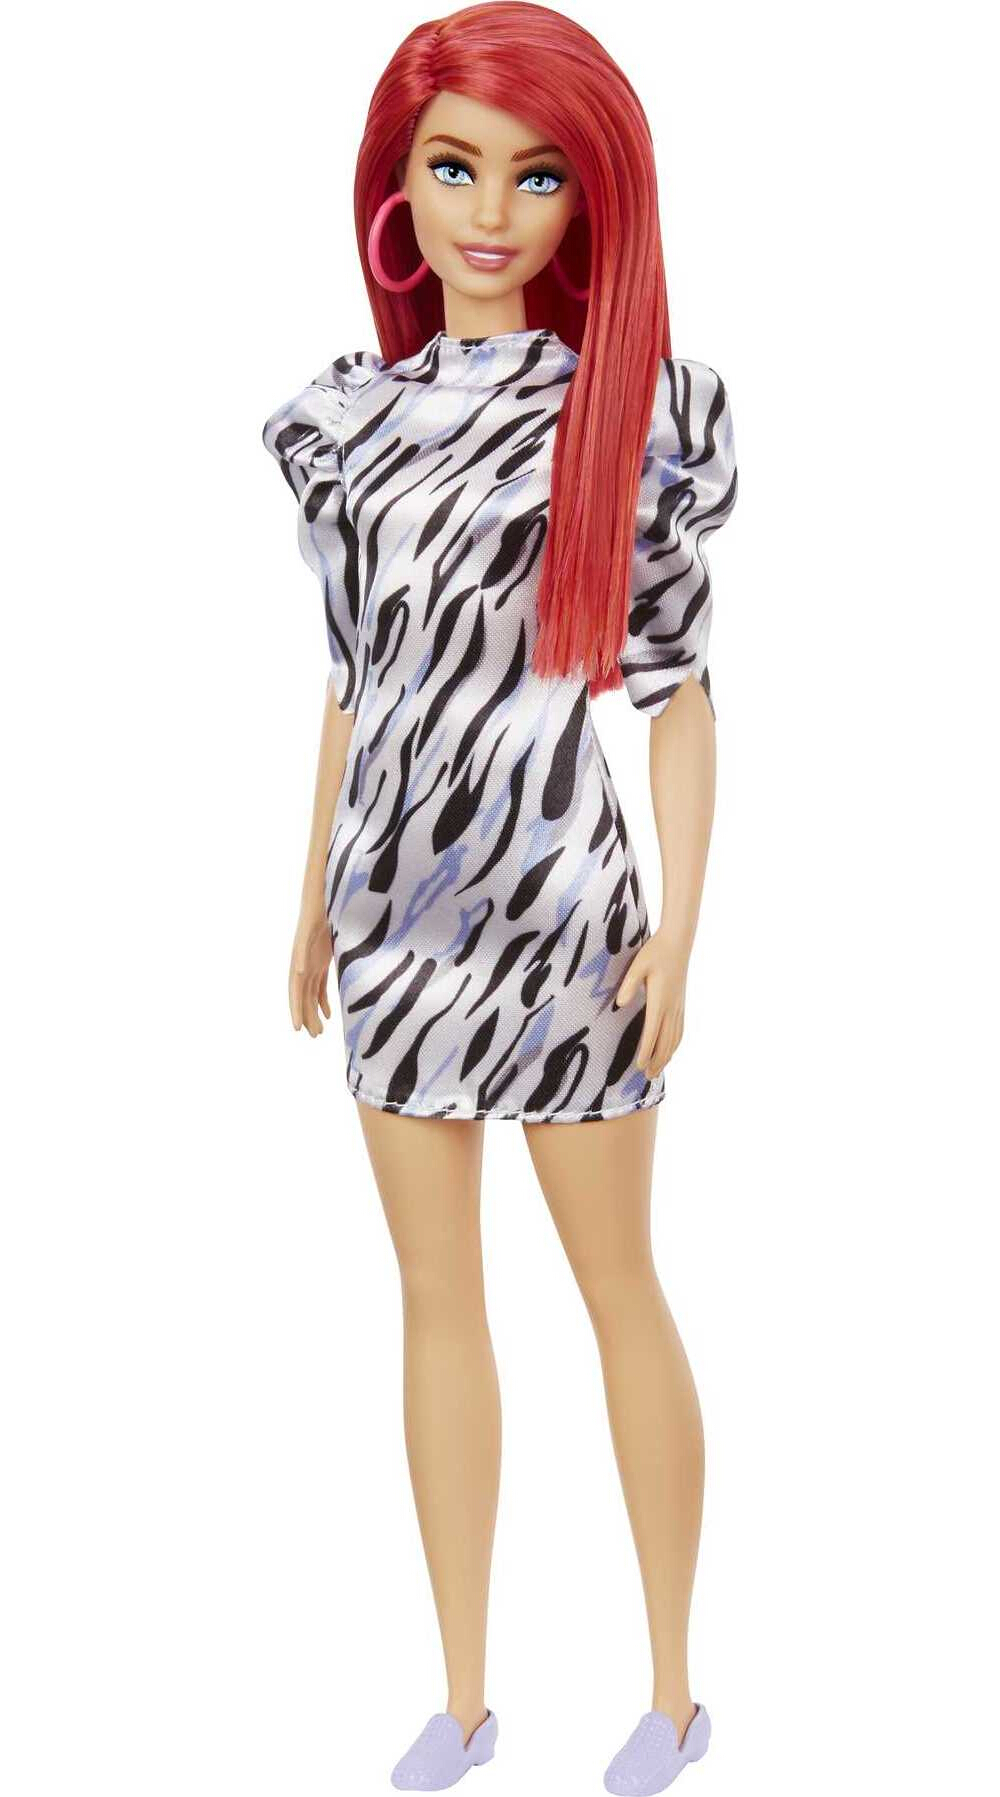 Barbie Fashionistas Doll #168 with Smaller Bust, & Long Red Hair in Zebra-striped Dress - image 1 of 7